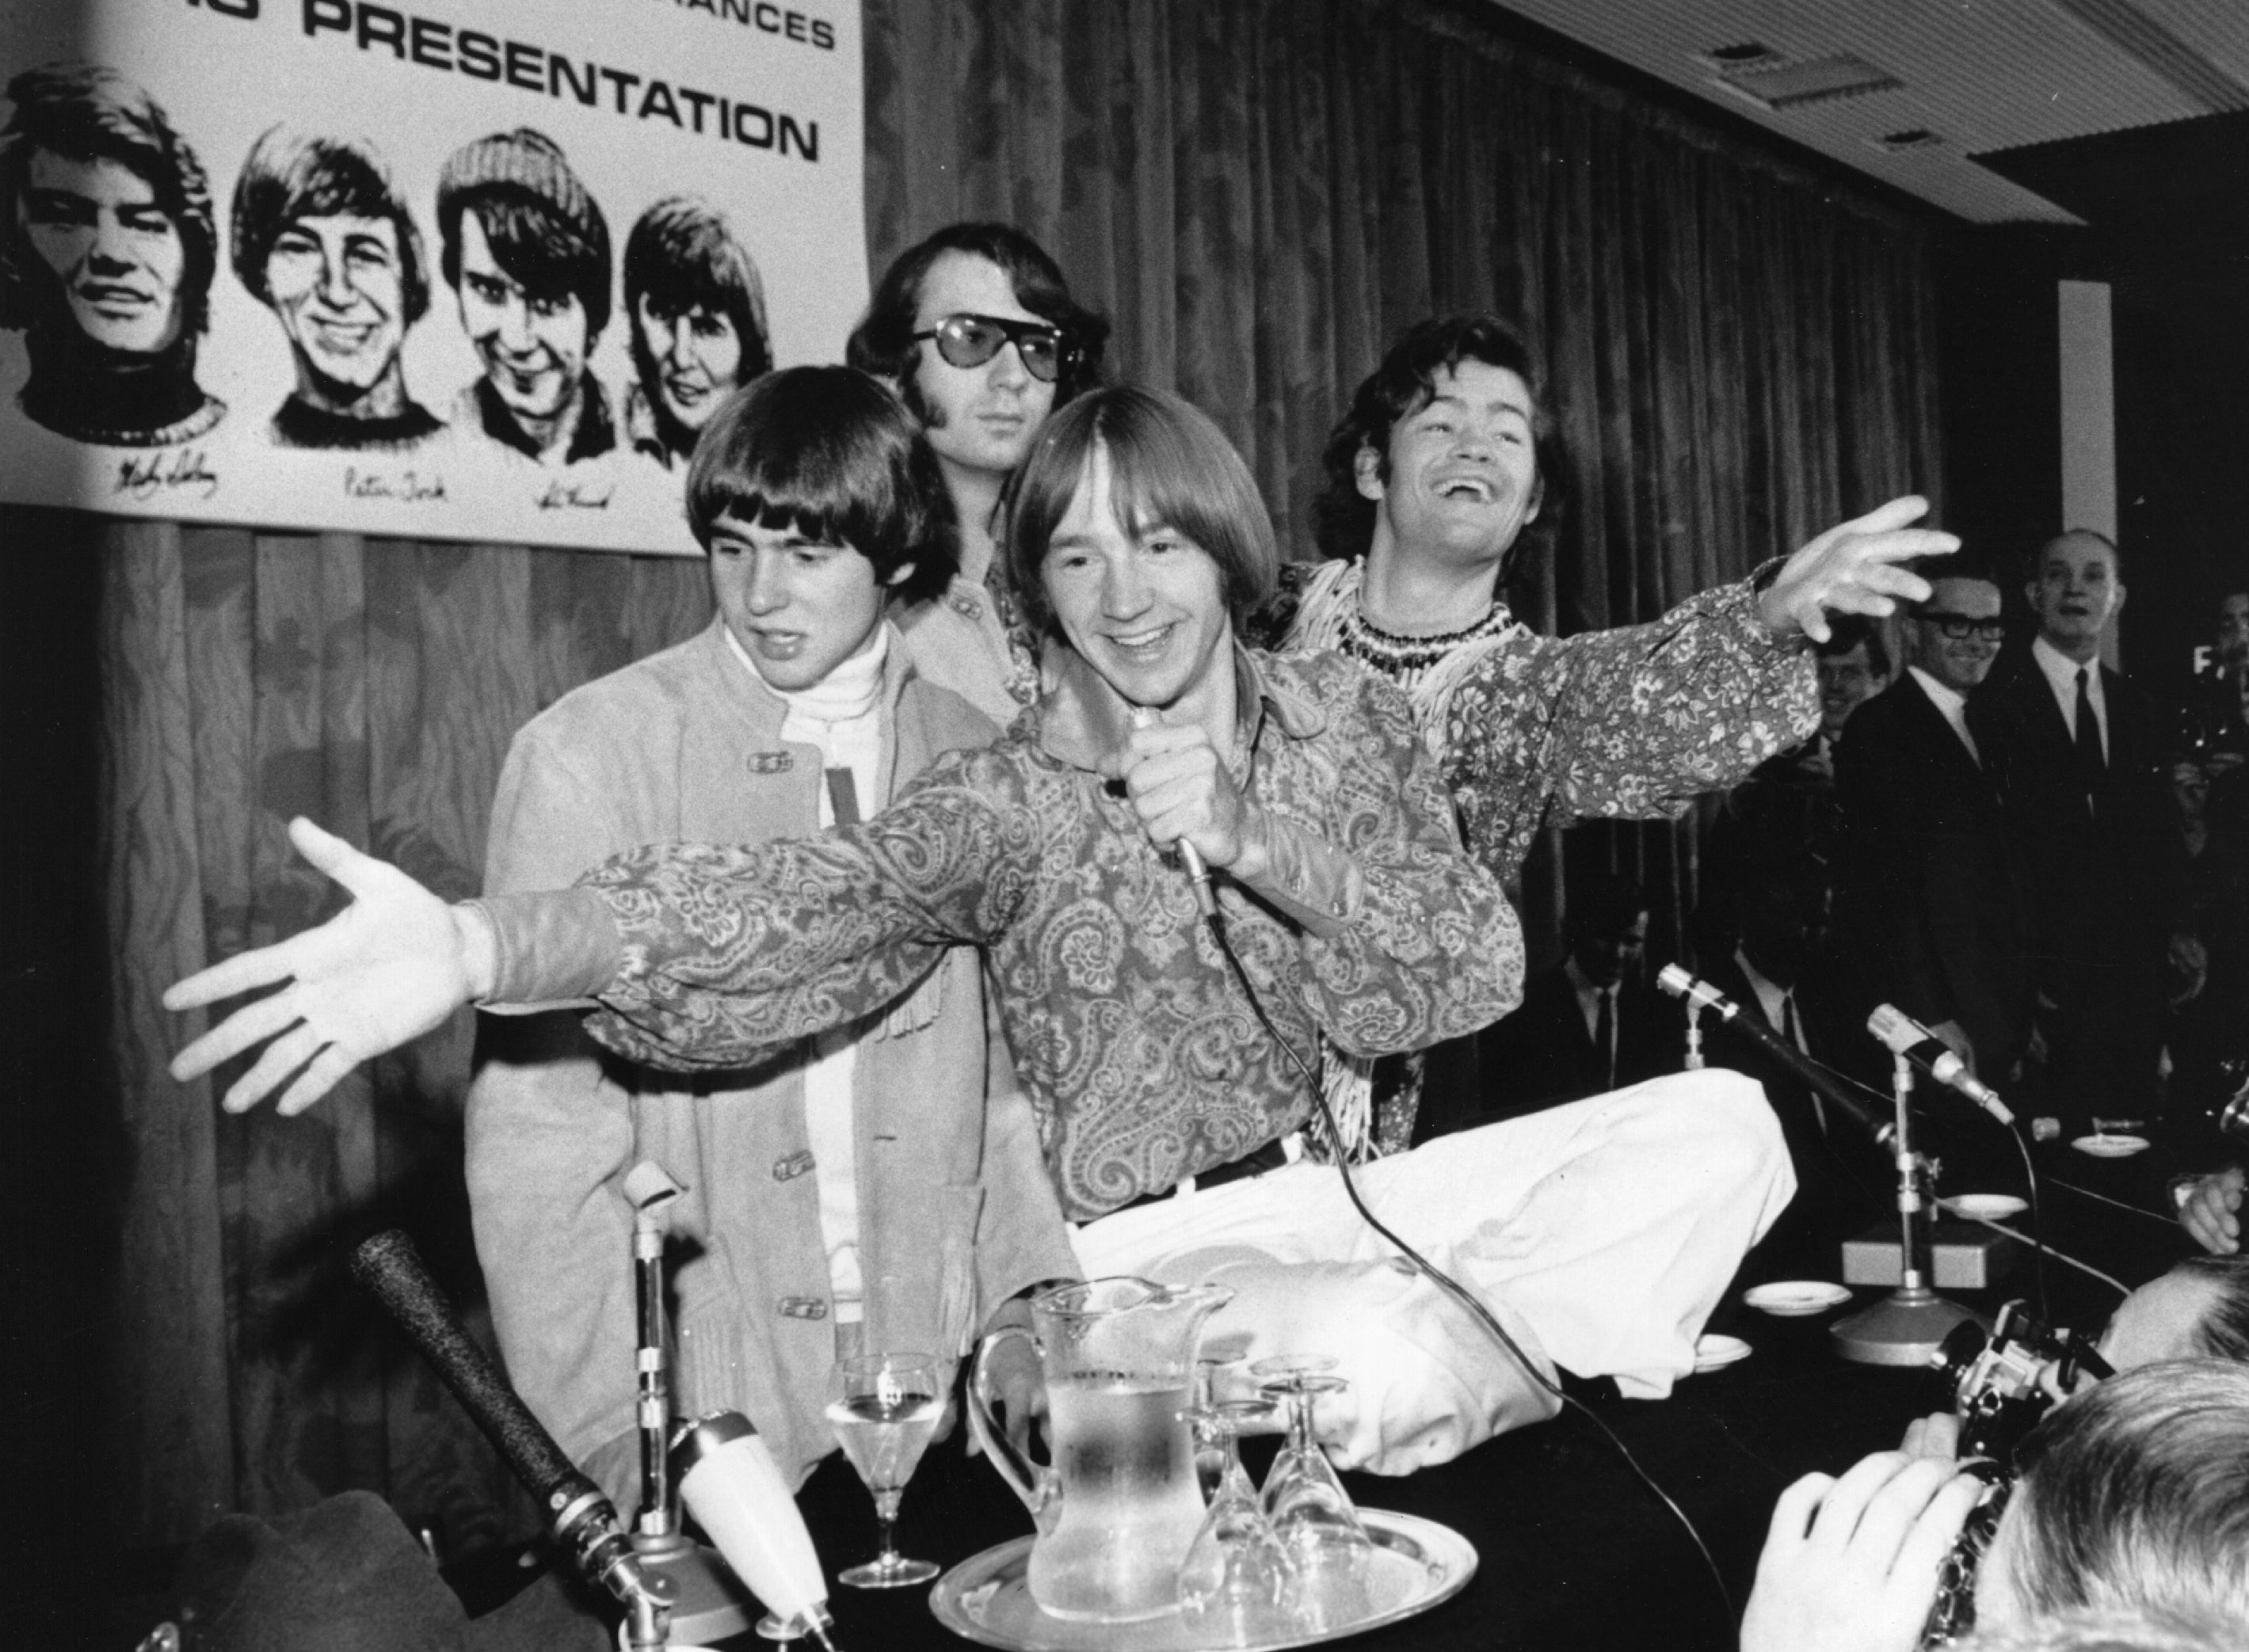 The Monkees' Davy Jones, Mike Nesmith, Peter Tork, and Micky Dolenz near a pitcher